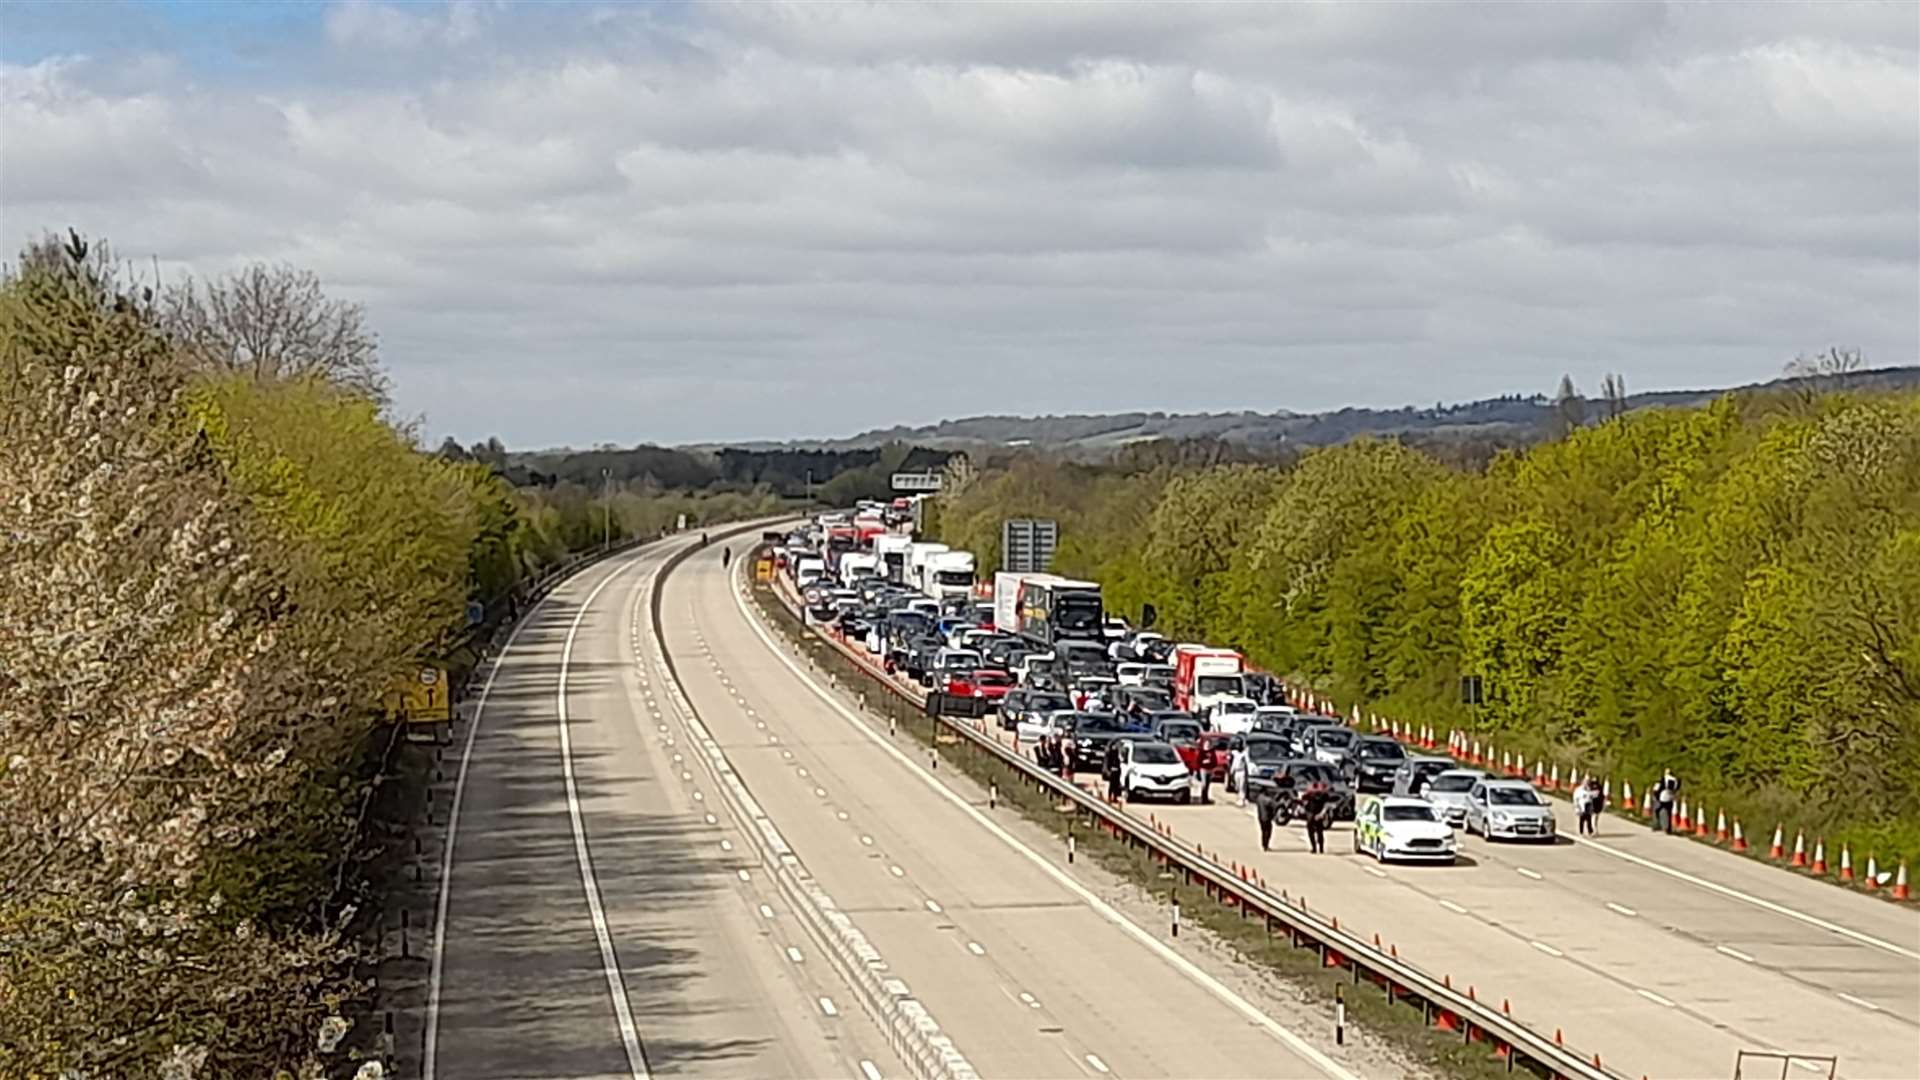 Traffic was being held on the M20 near to Junction 9